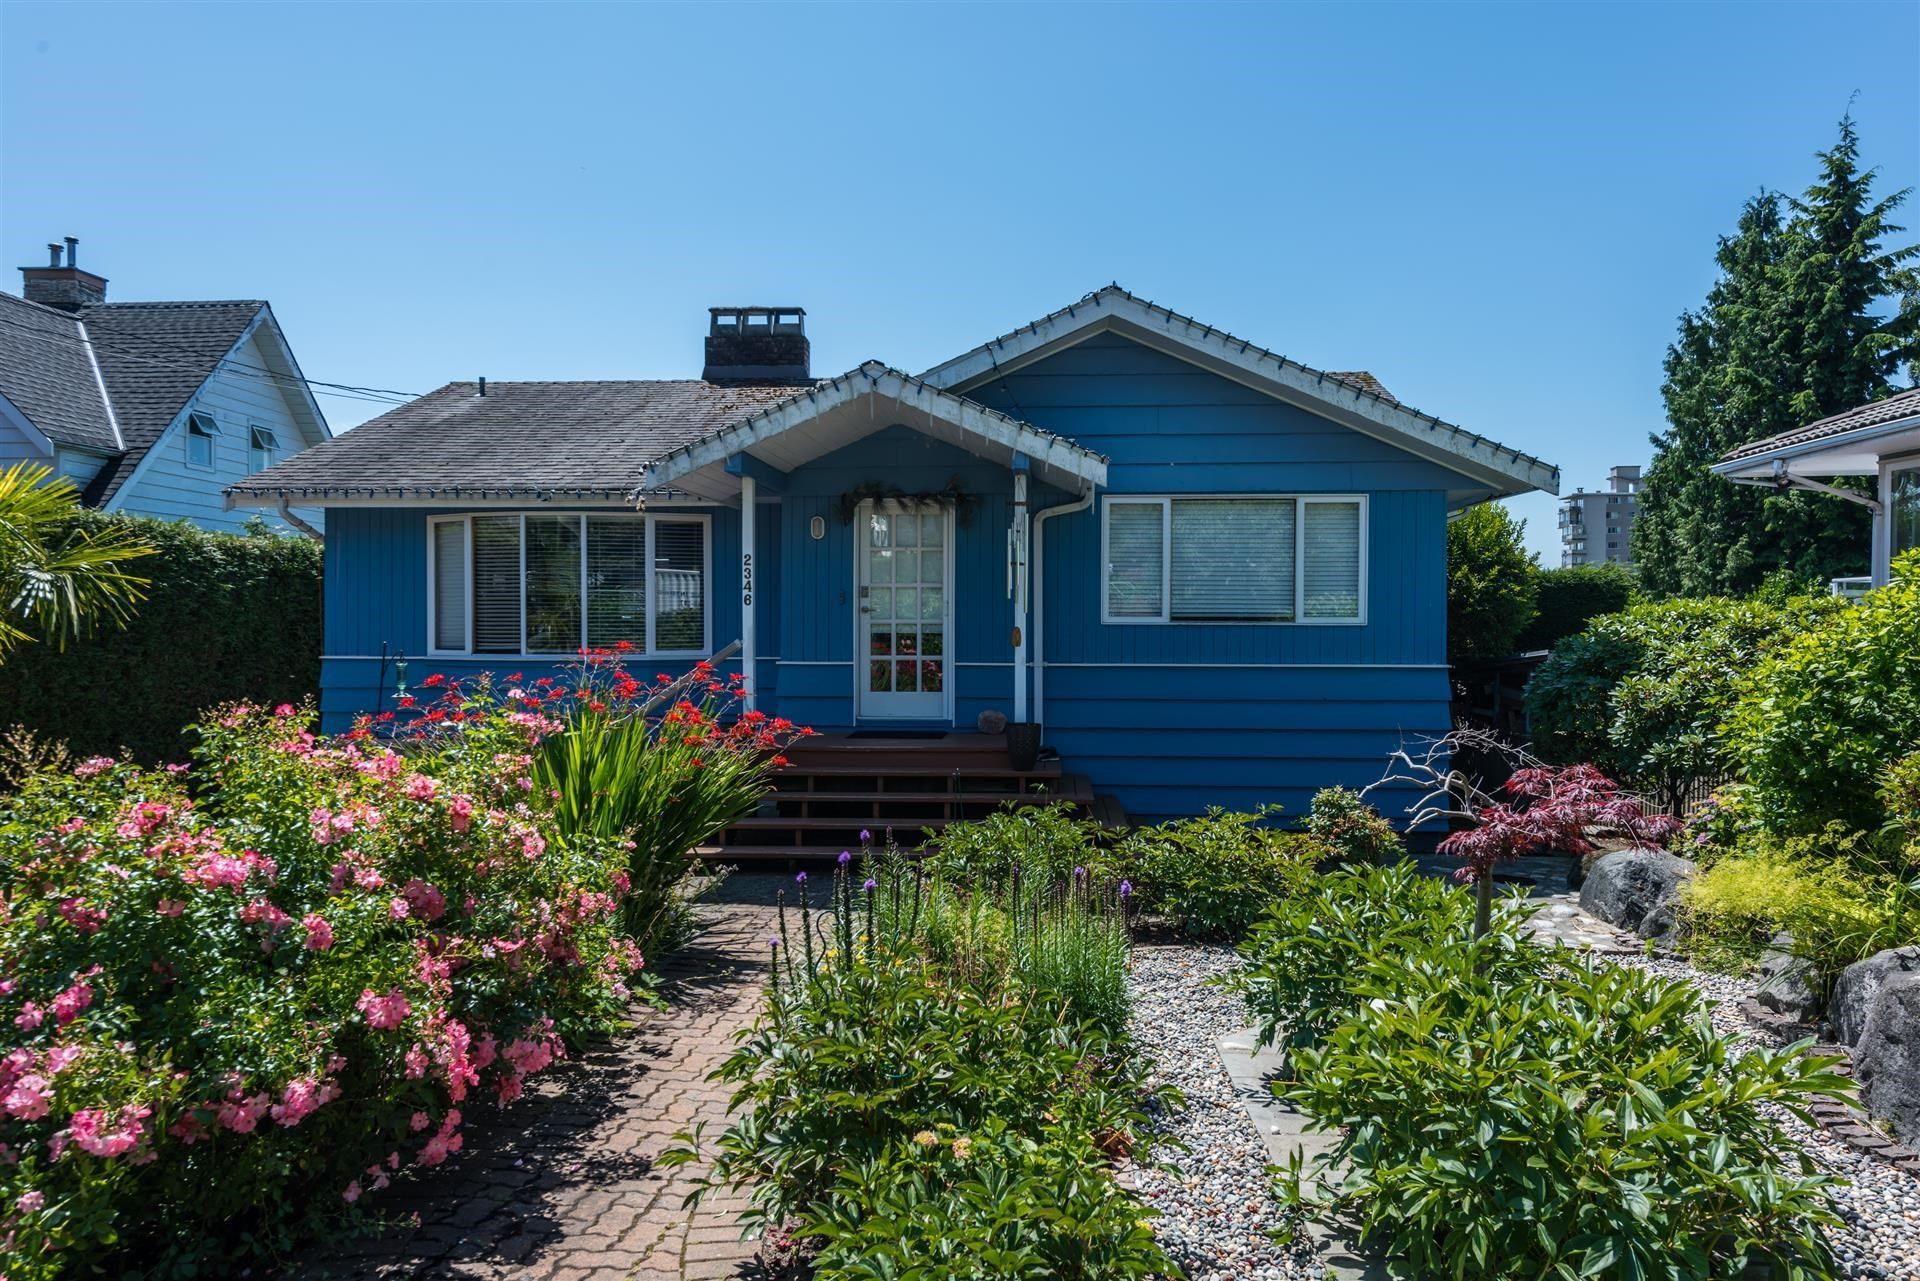 Main Photo: 2346 HAYWOOD Avenue in West Vancouver: Dundarave House for sale : MLS®# R2615816